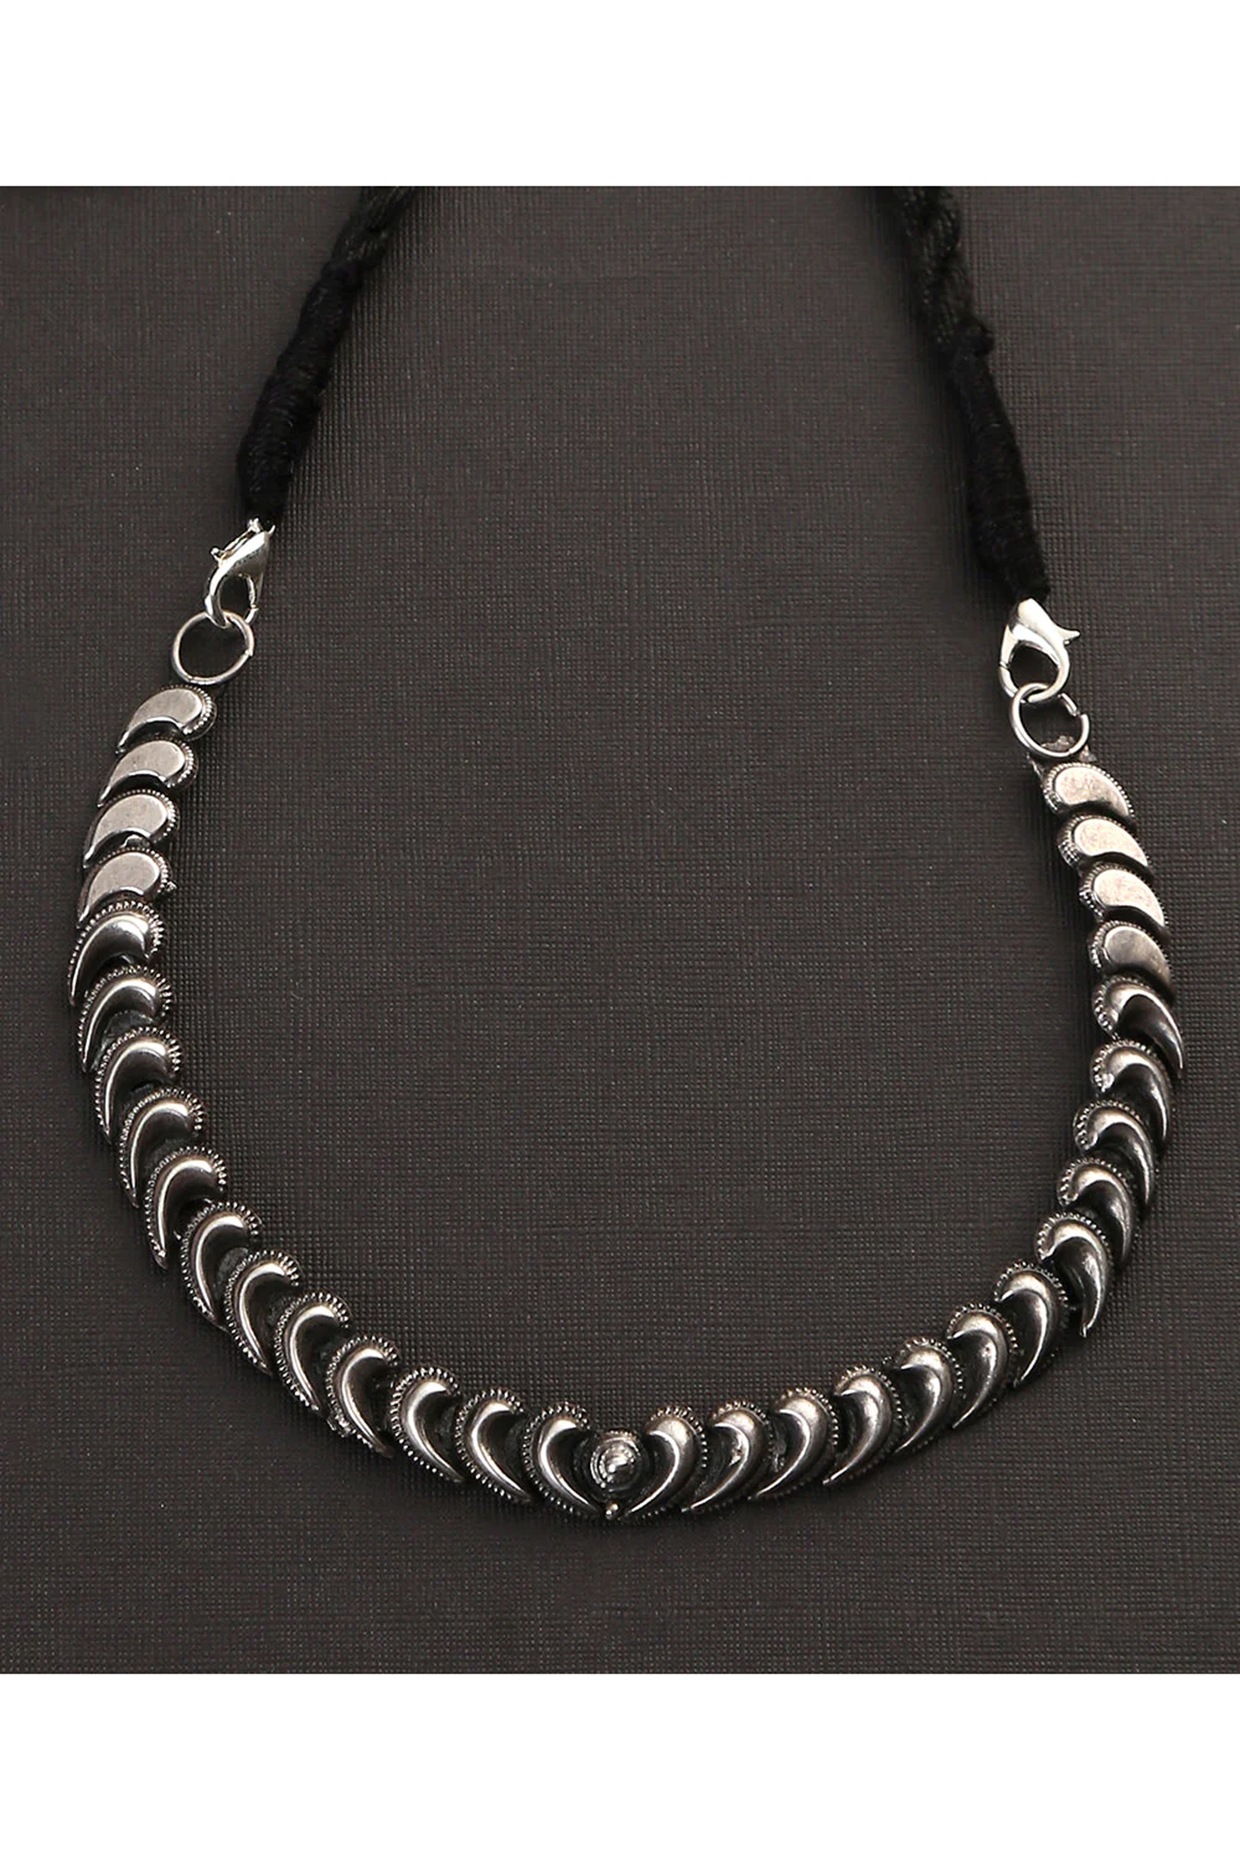 925 Sterling Silver Braided Chain Necklace 20